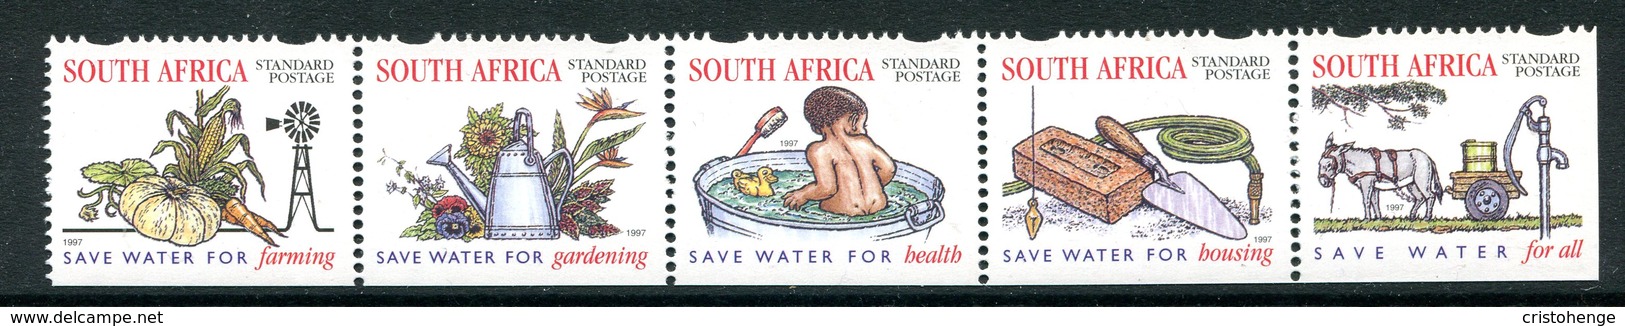 South Africa 1997 National Water Conservation - Elliptical Perf. - Set MNH (SG 951-955) - Unused Stamps